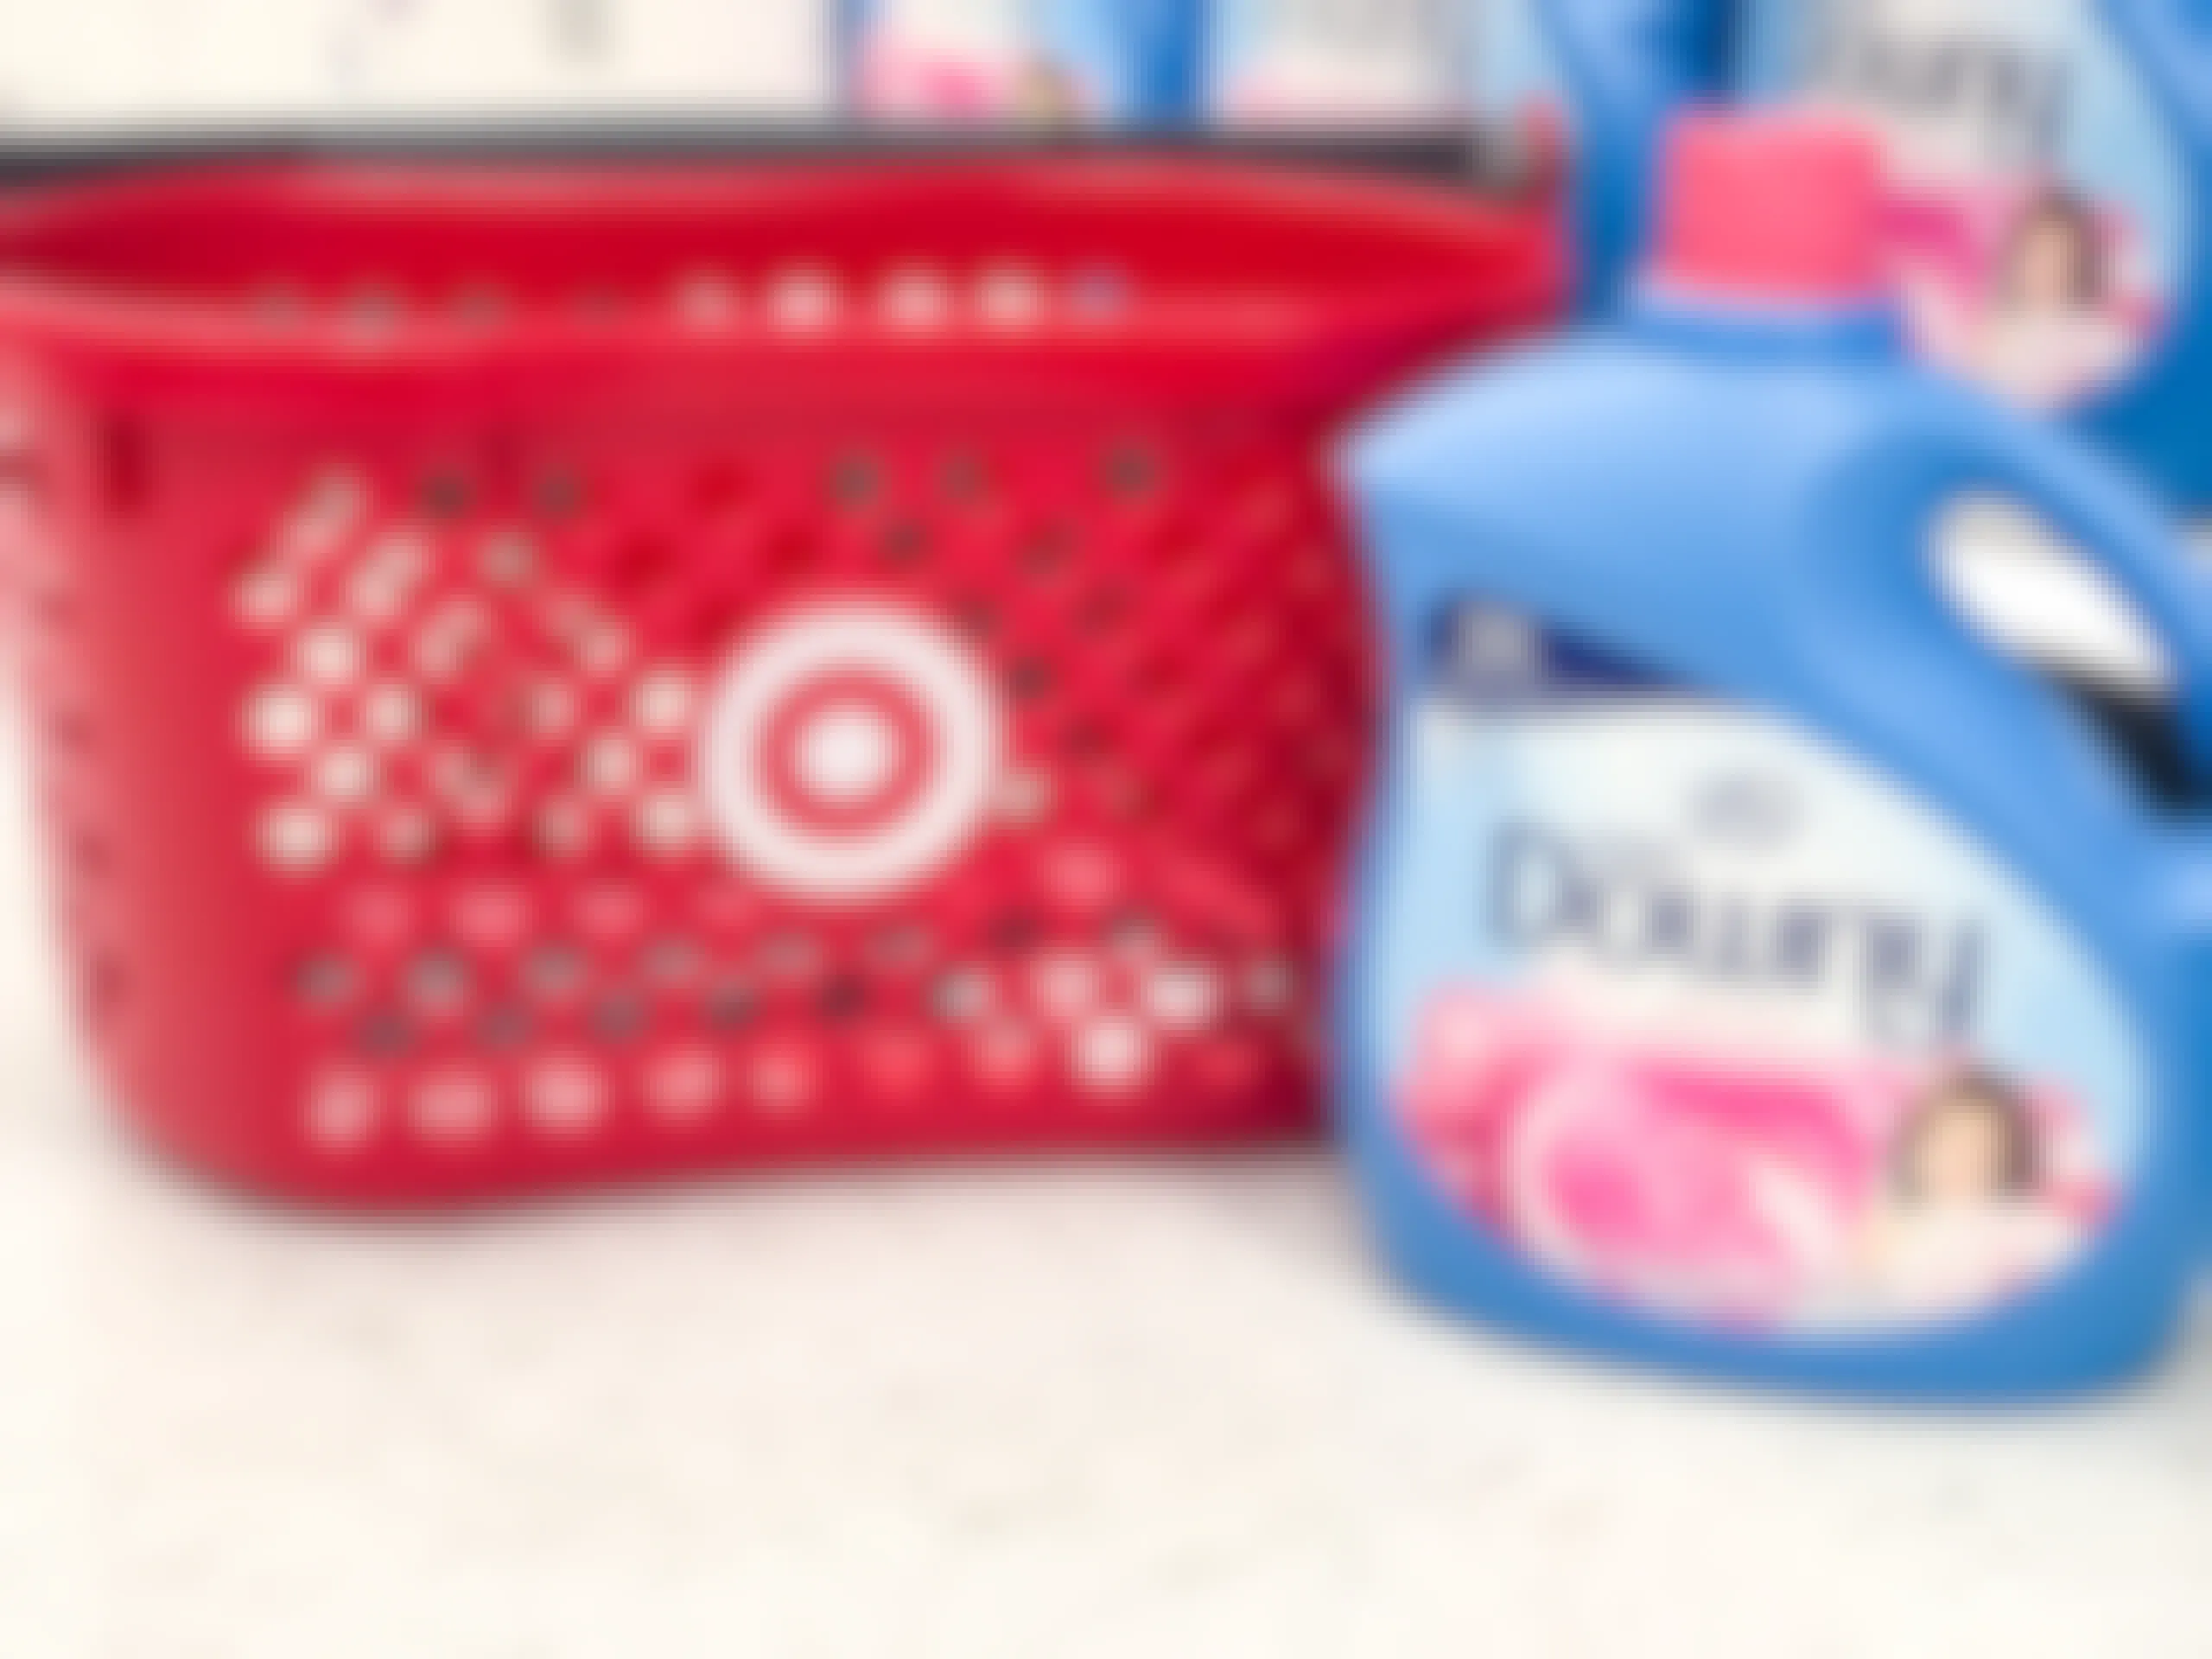 Downy in front of Target shopping basket on the floor